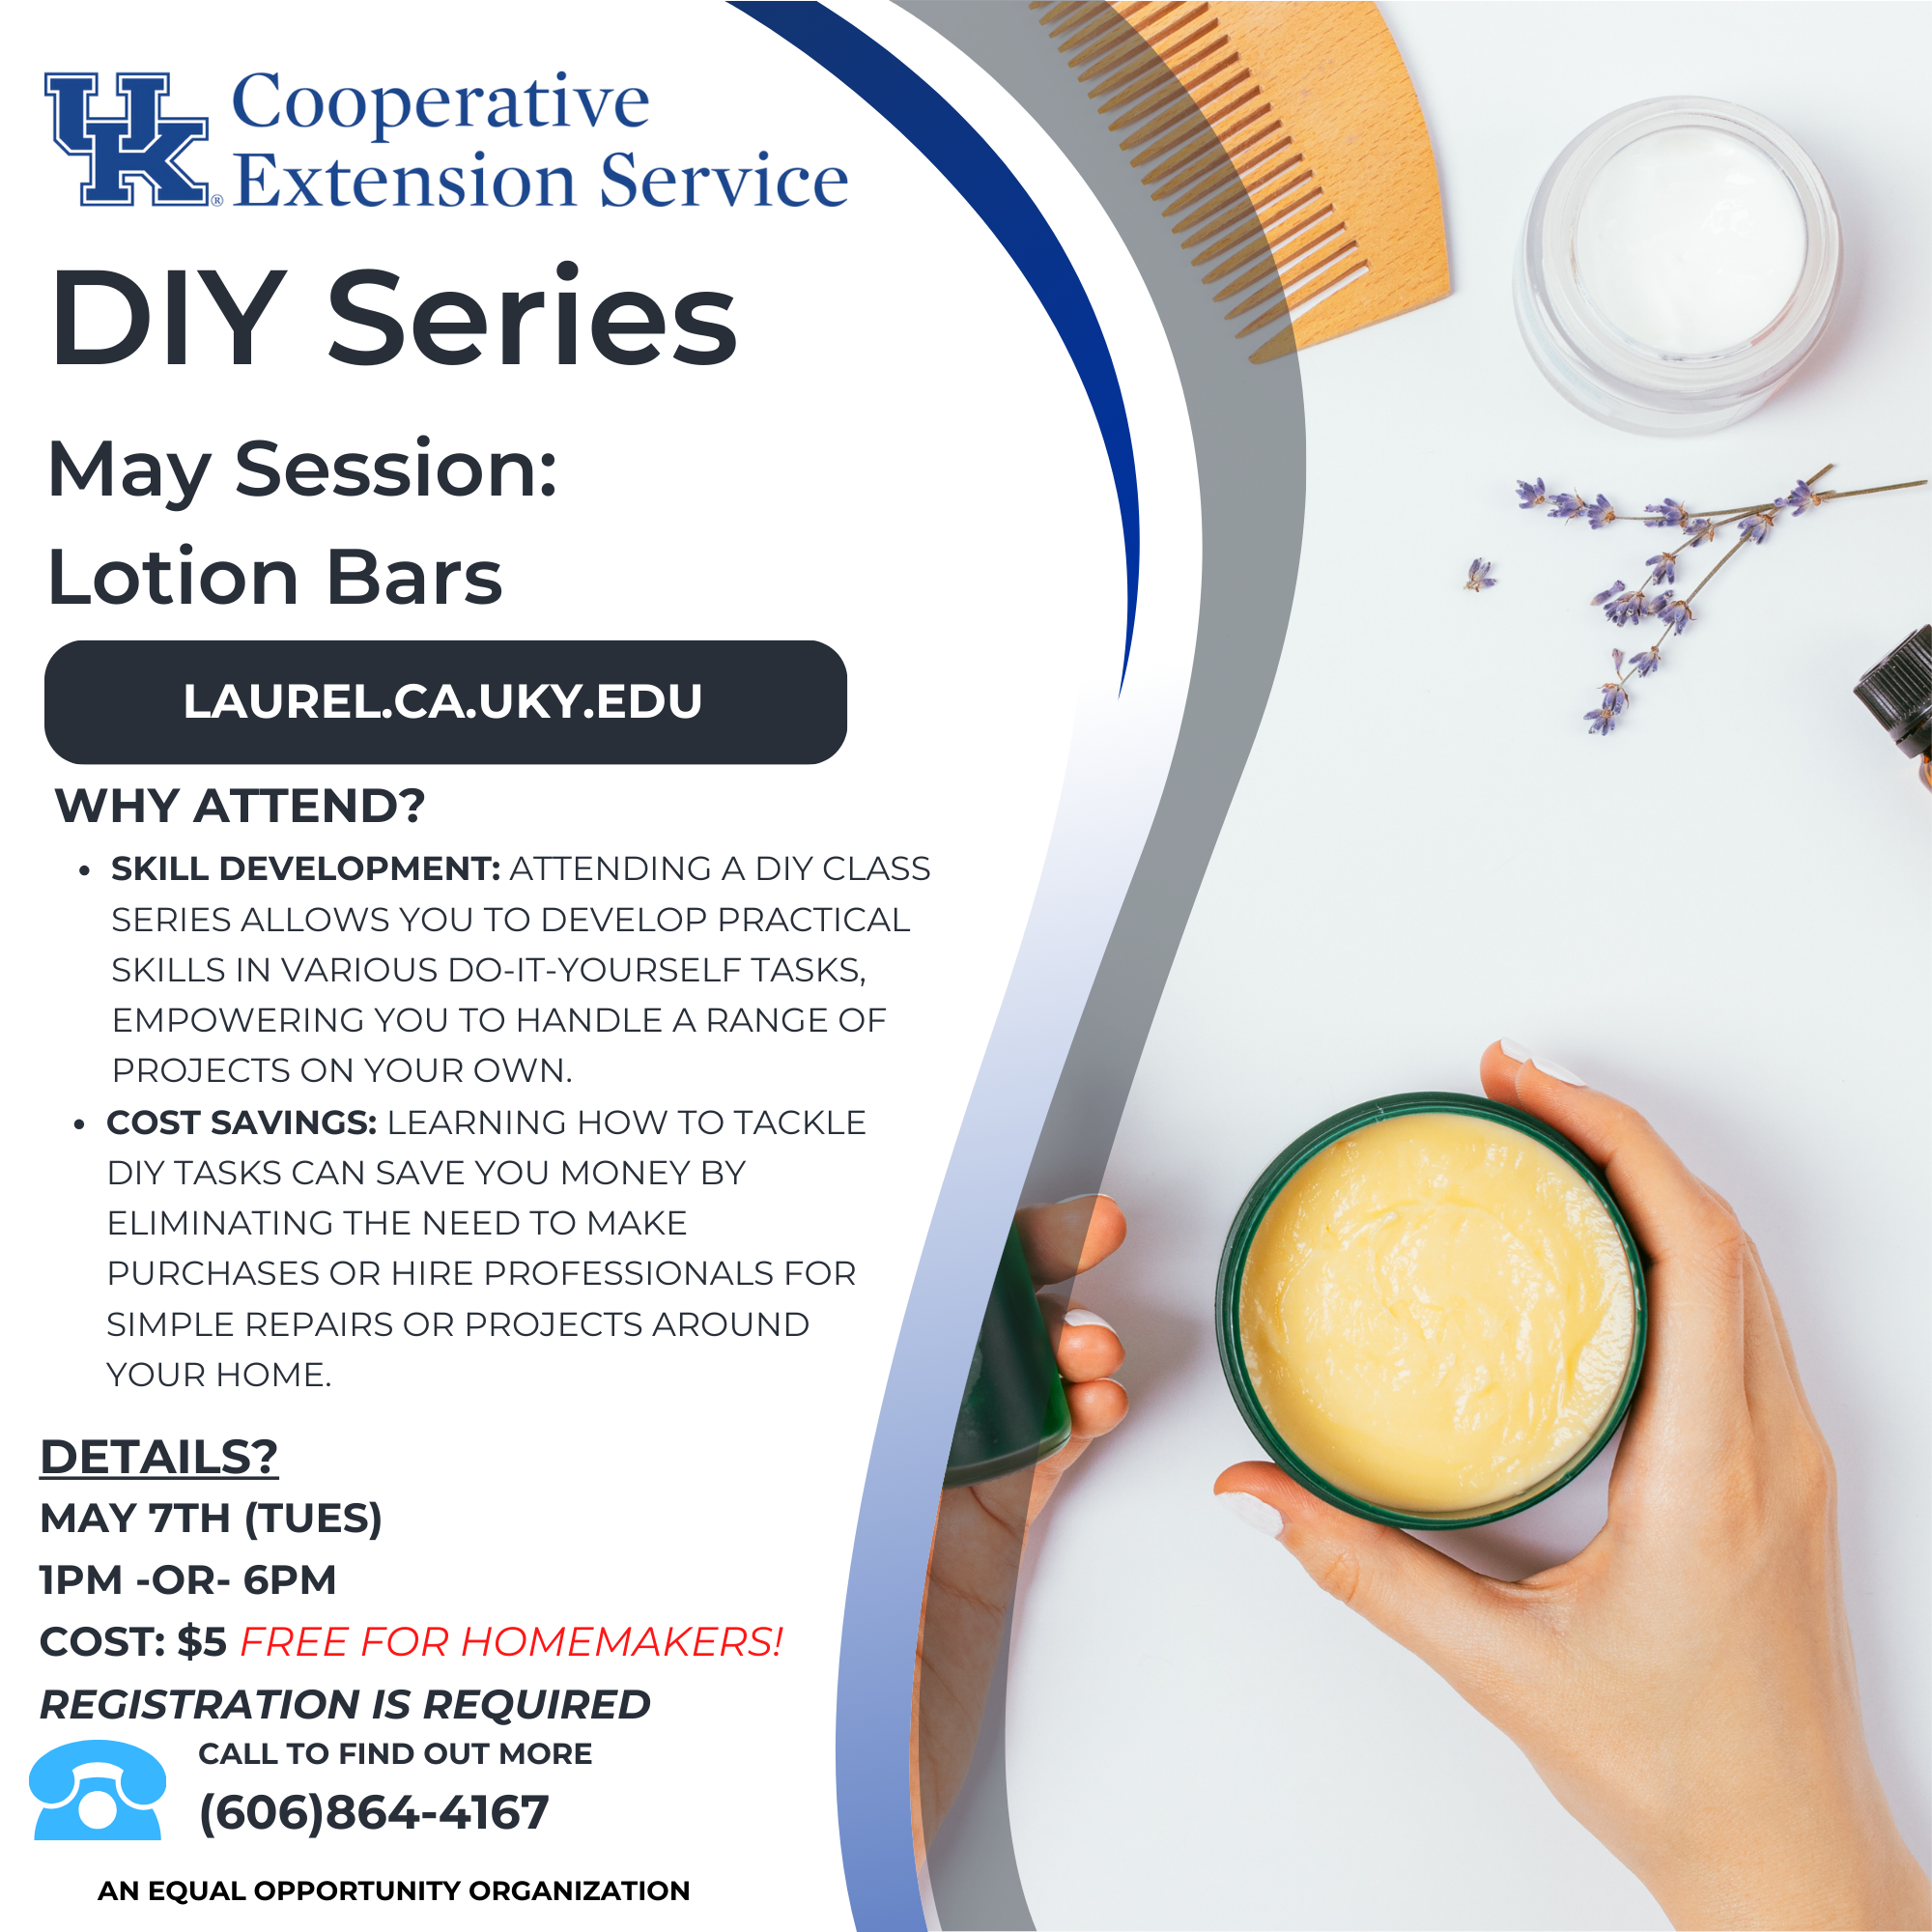 Flyer with background containing lotion in jars and includes class date details.